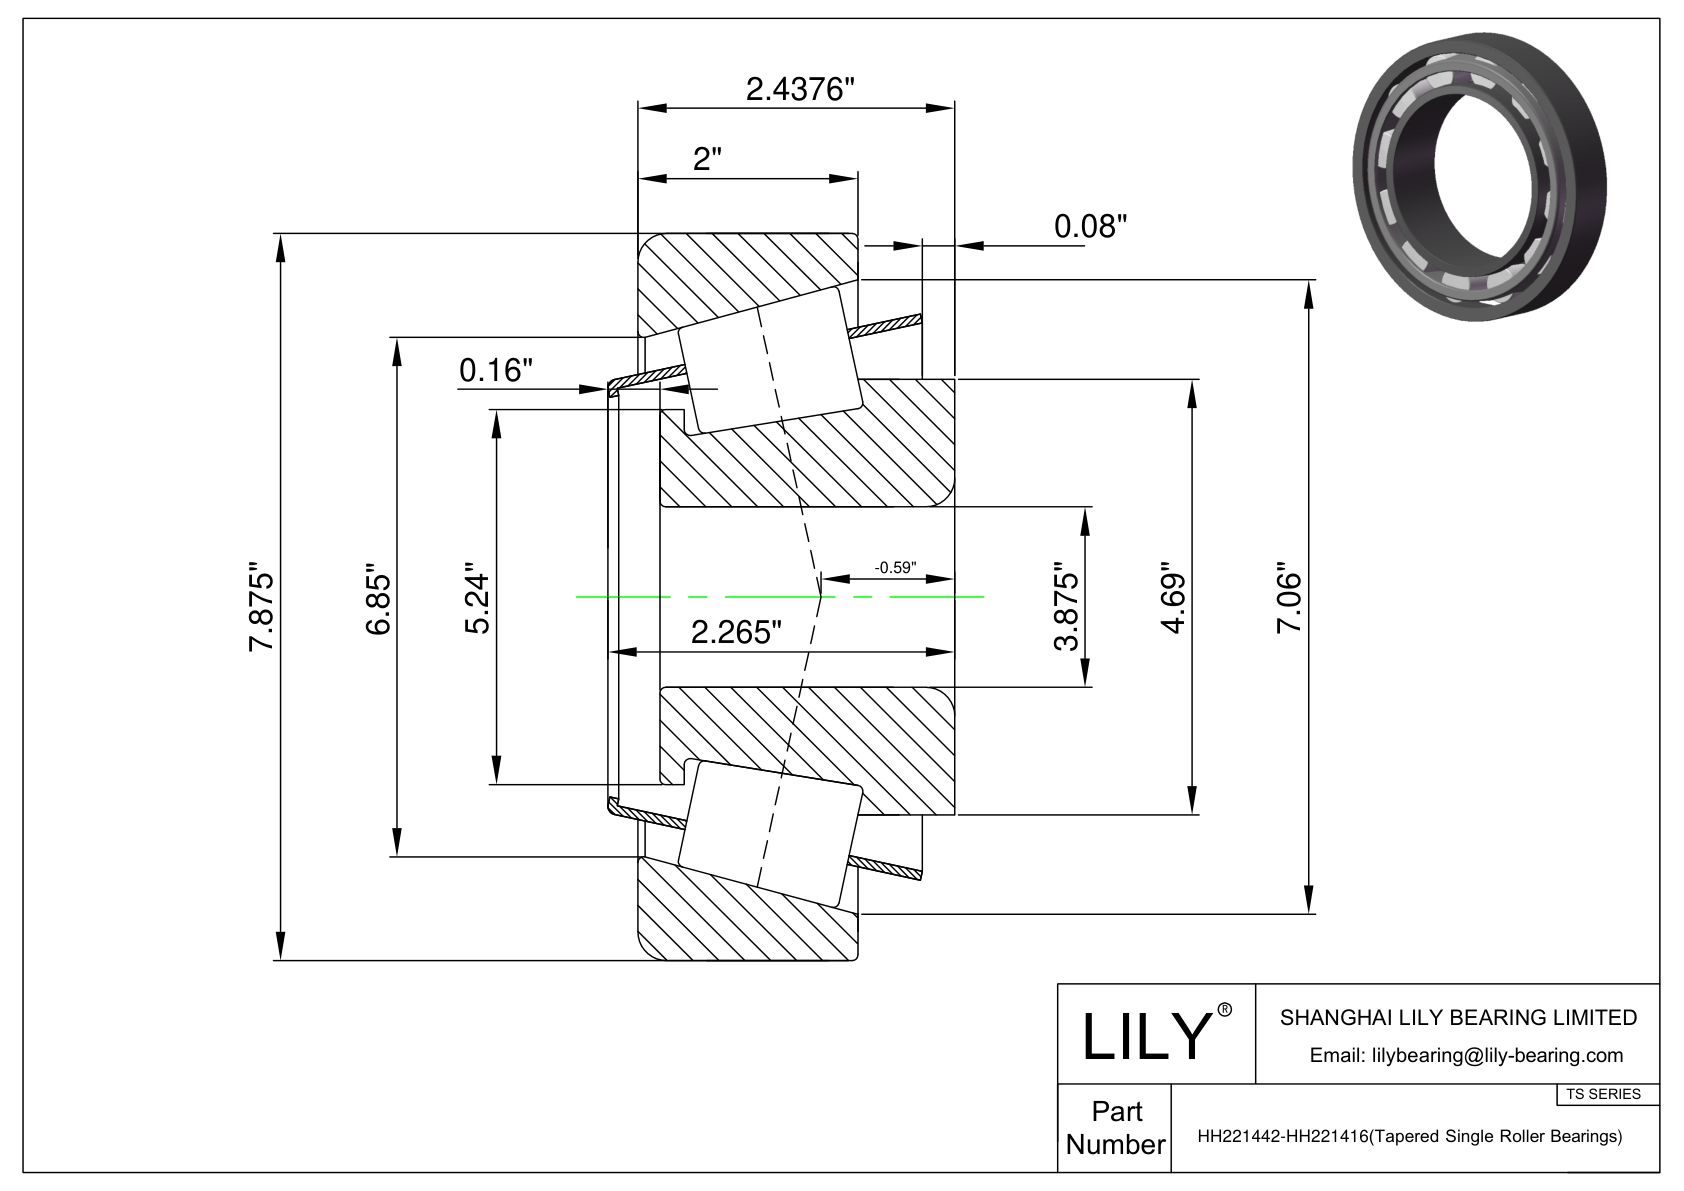 HH221442-HH221416 TS (Tapered Single Roller Bearings) (Imperial) cad drawing